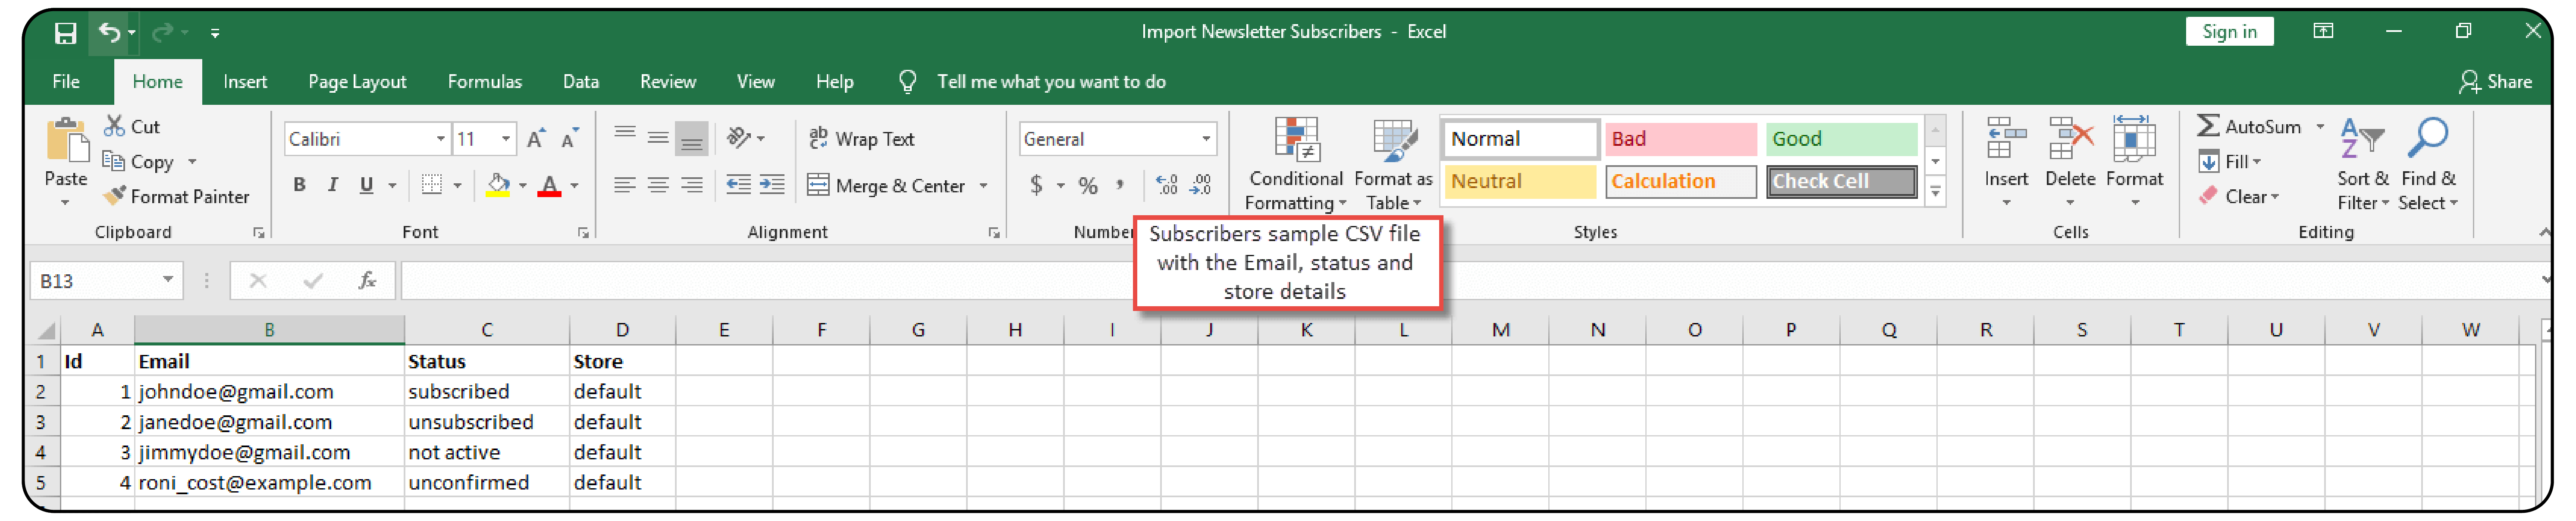 Magento 2 Import Export Newsletter Subscribers Extension -Prepare CSV